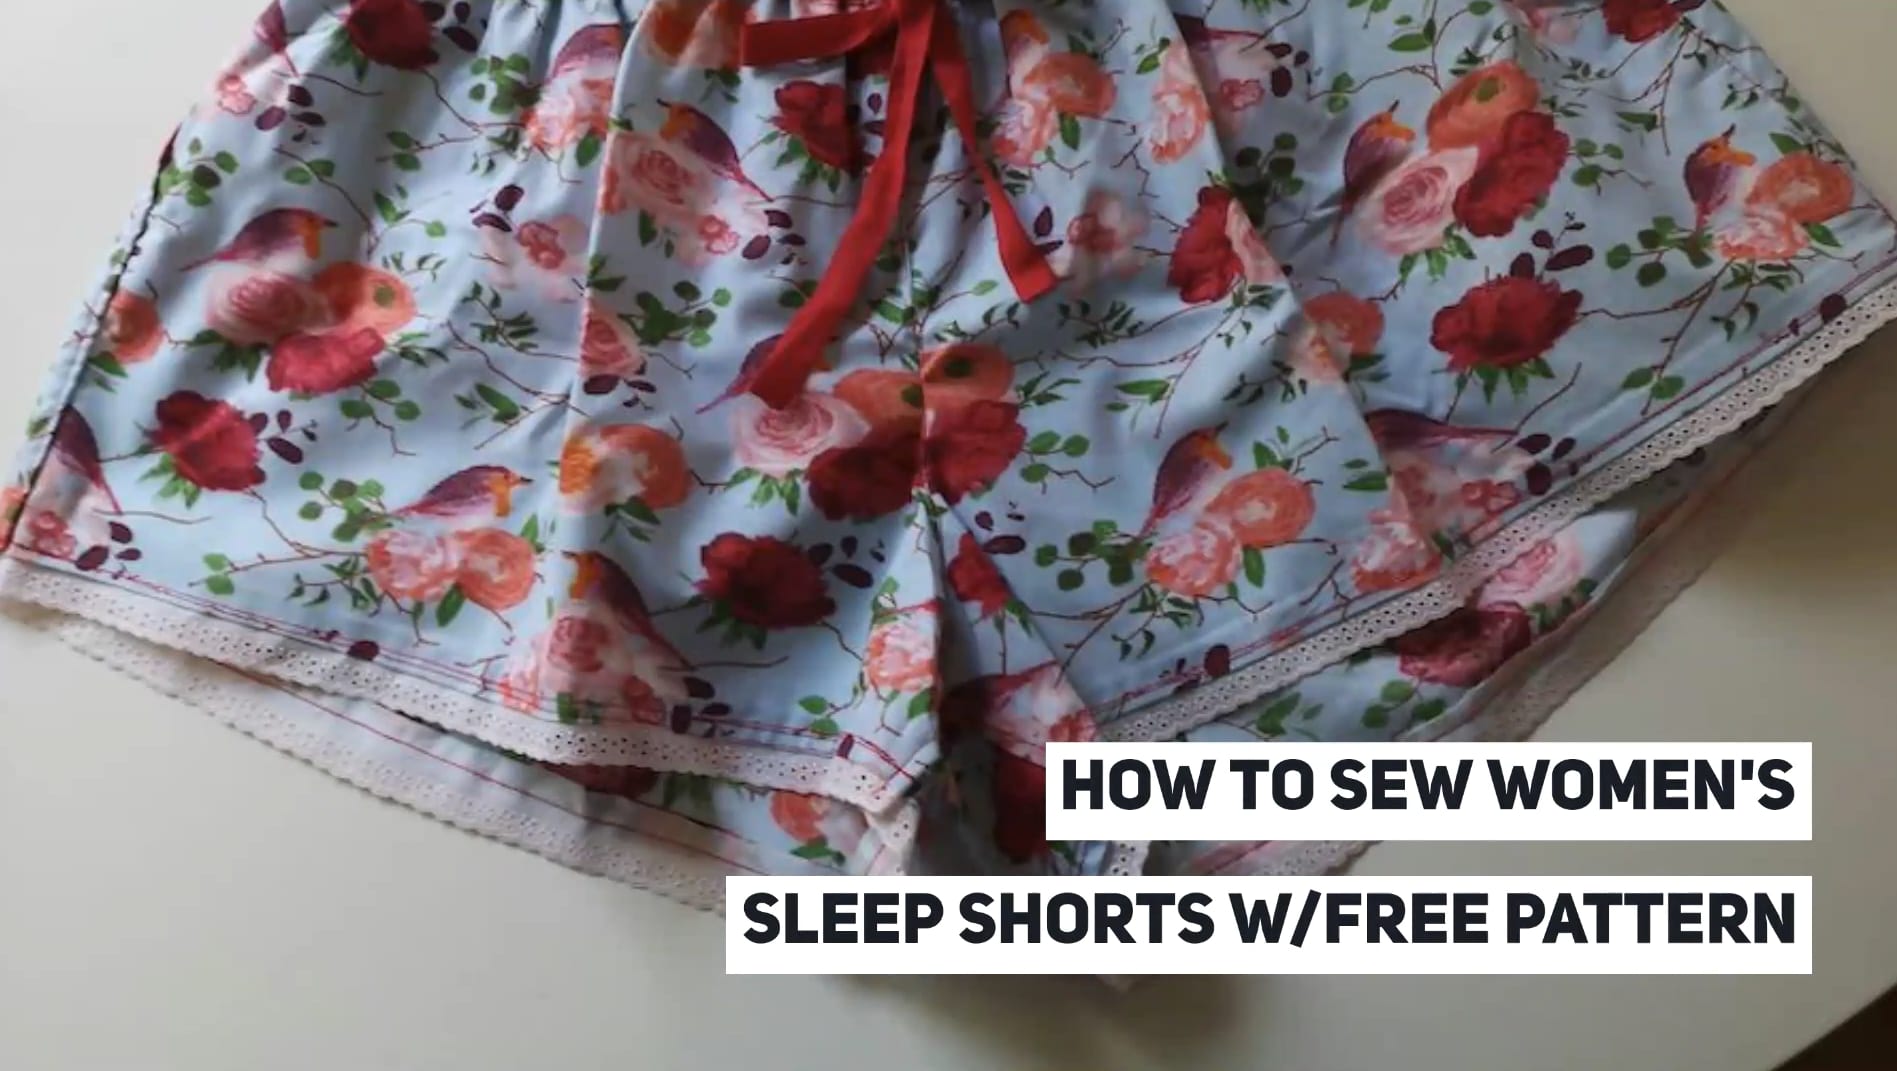 How to Sew Women's Sleep Shorts With Free Pattern